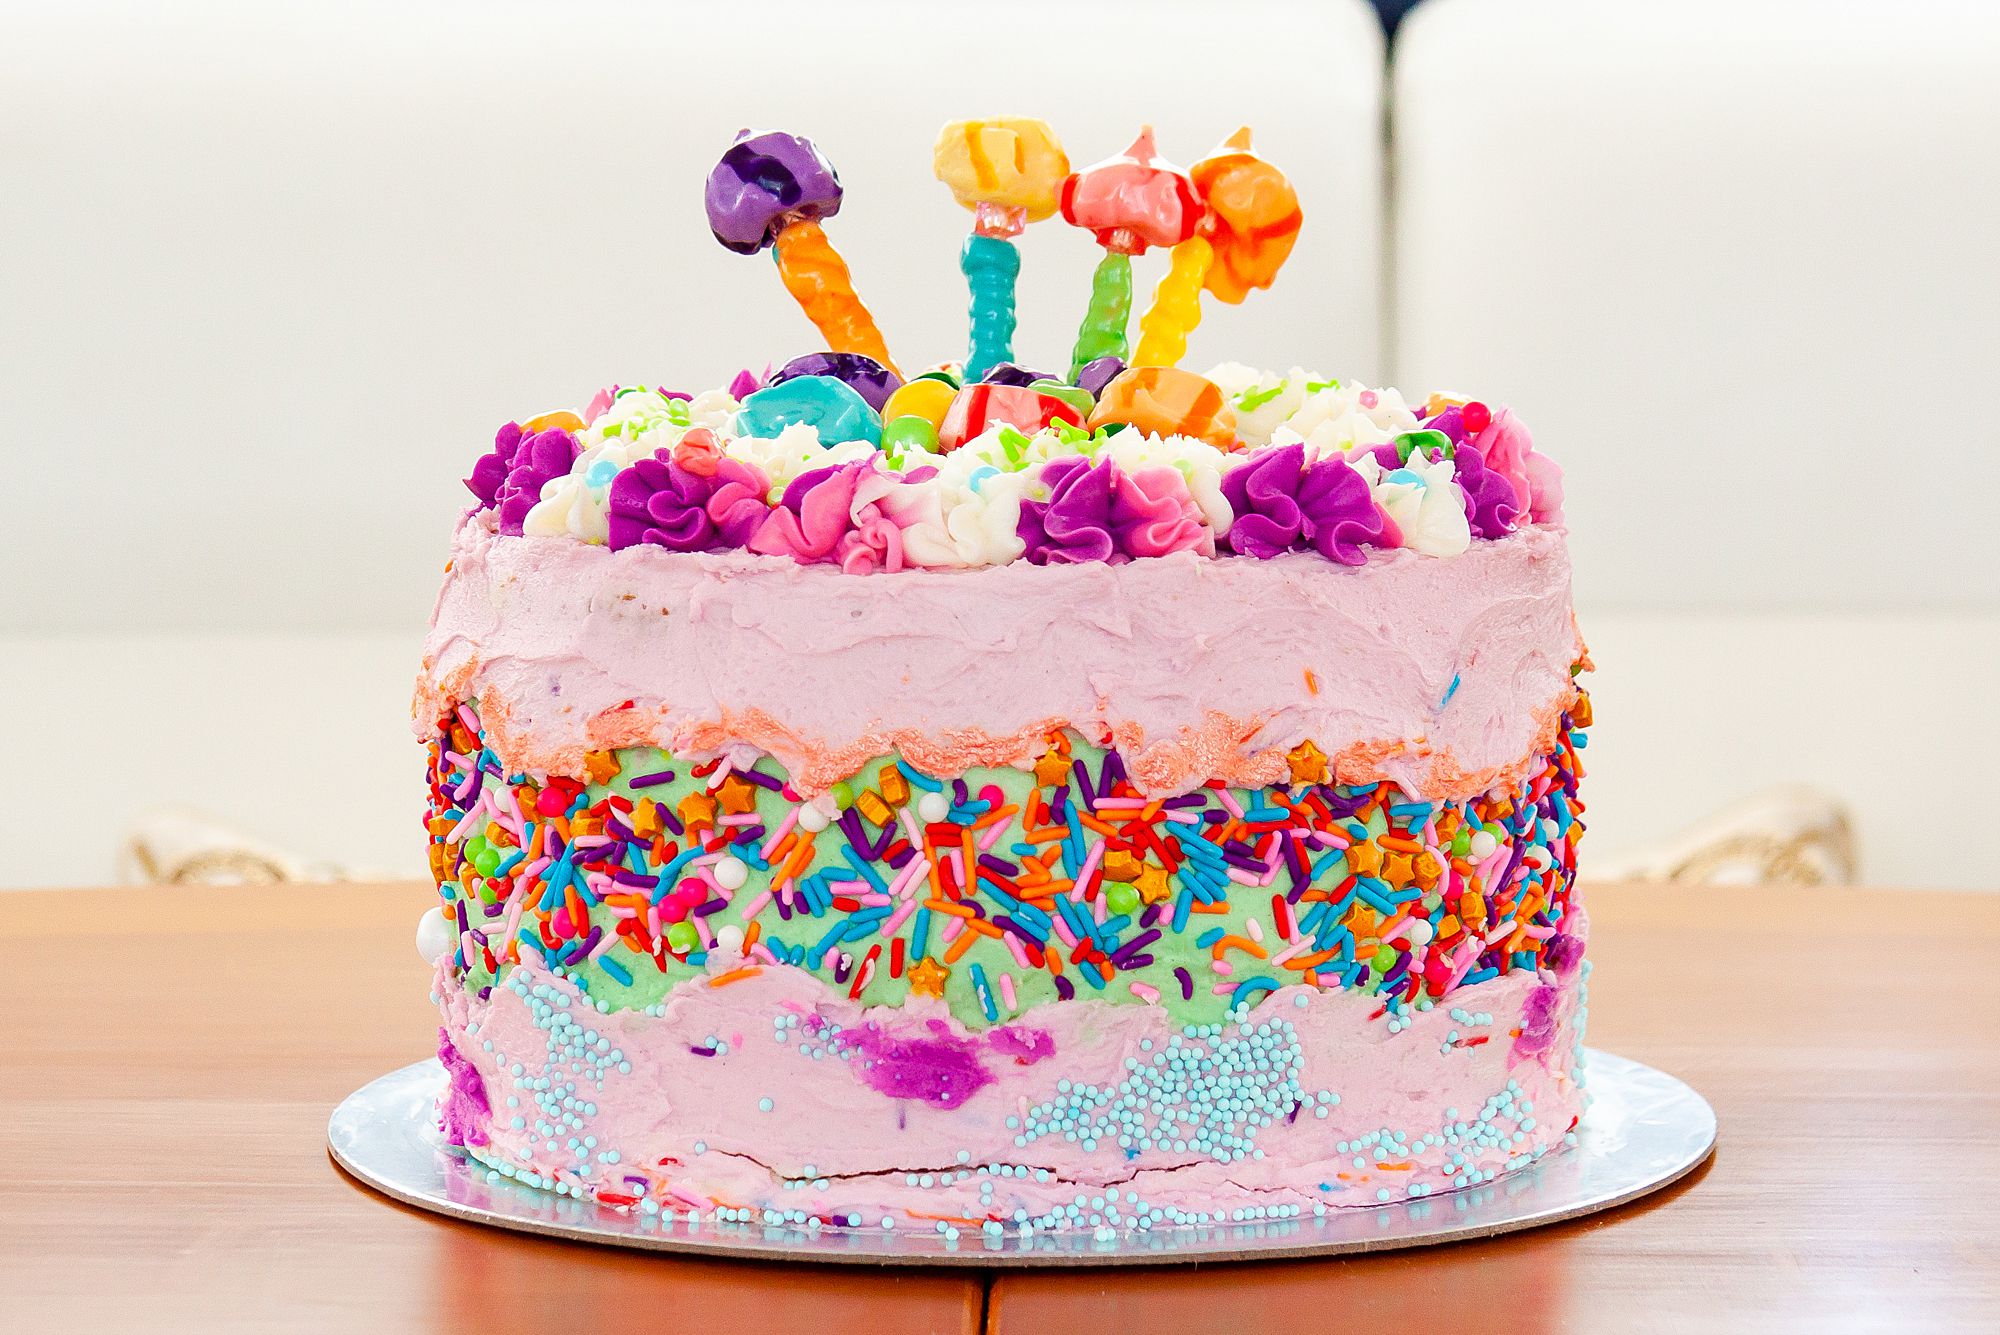 Lisa Frank inspired adult vegan birthday cake with pink, purple, and green frosting, multicolored sprinkles, and saltwater taffy from La Kings in Galveston.